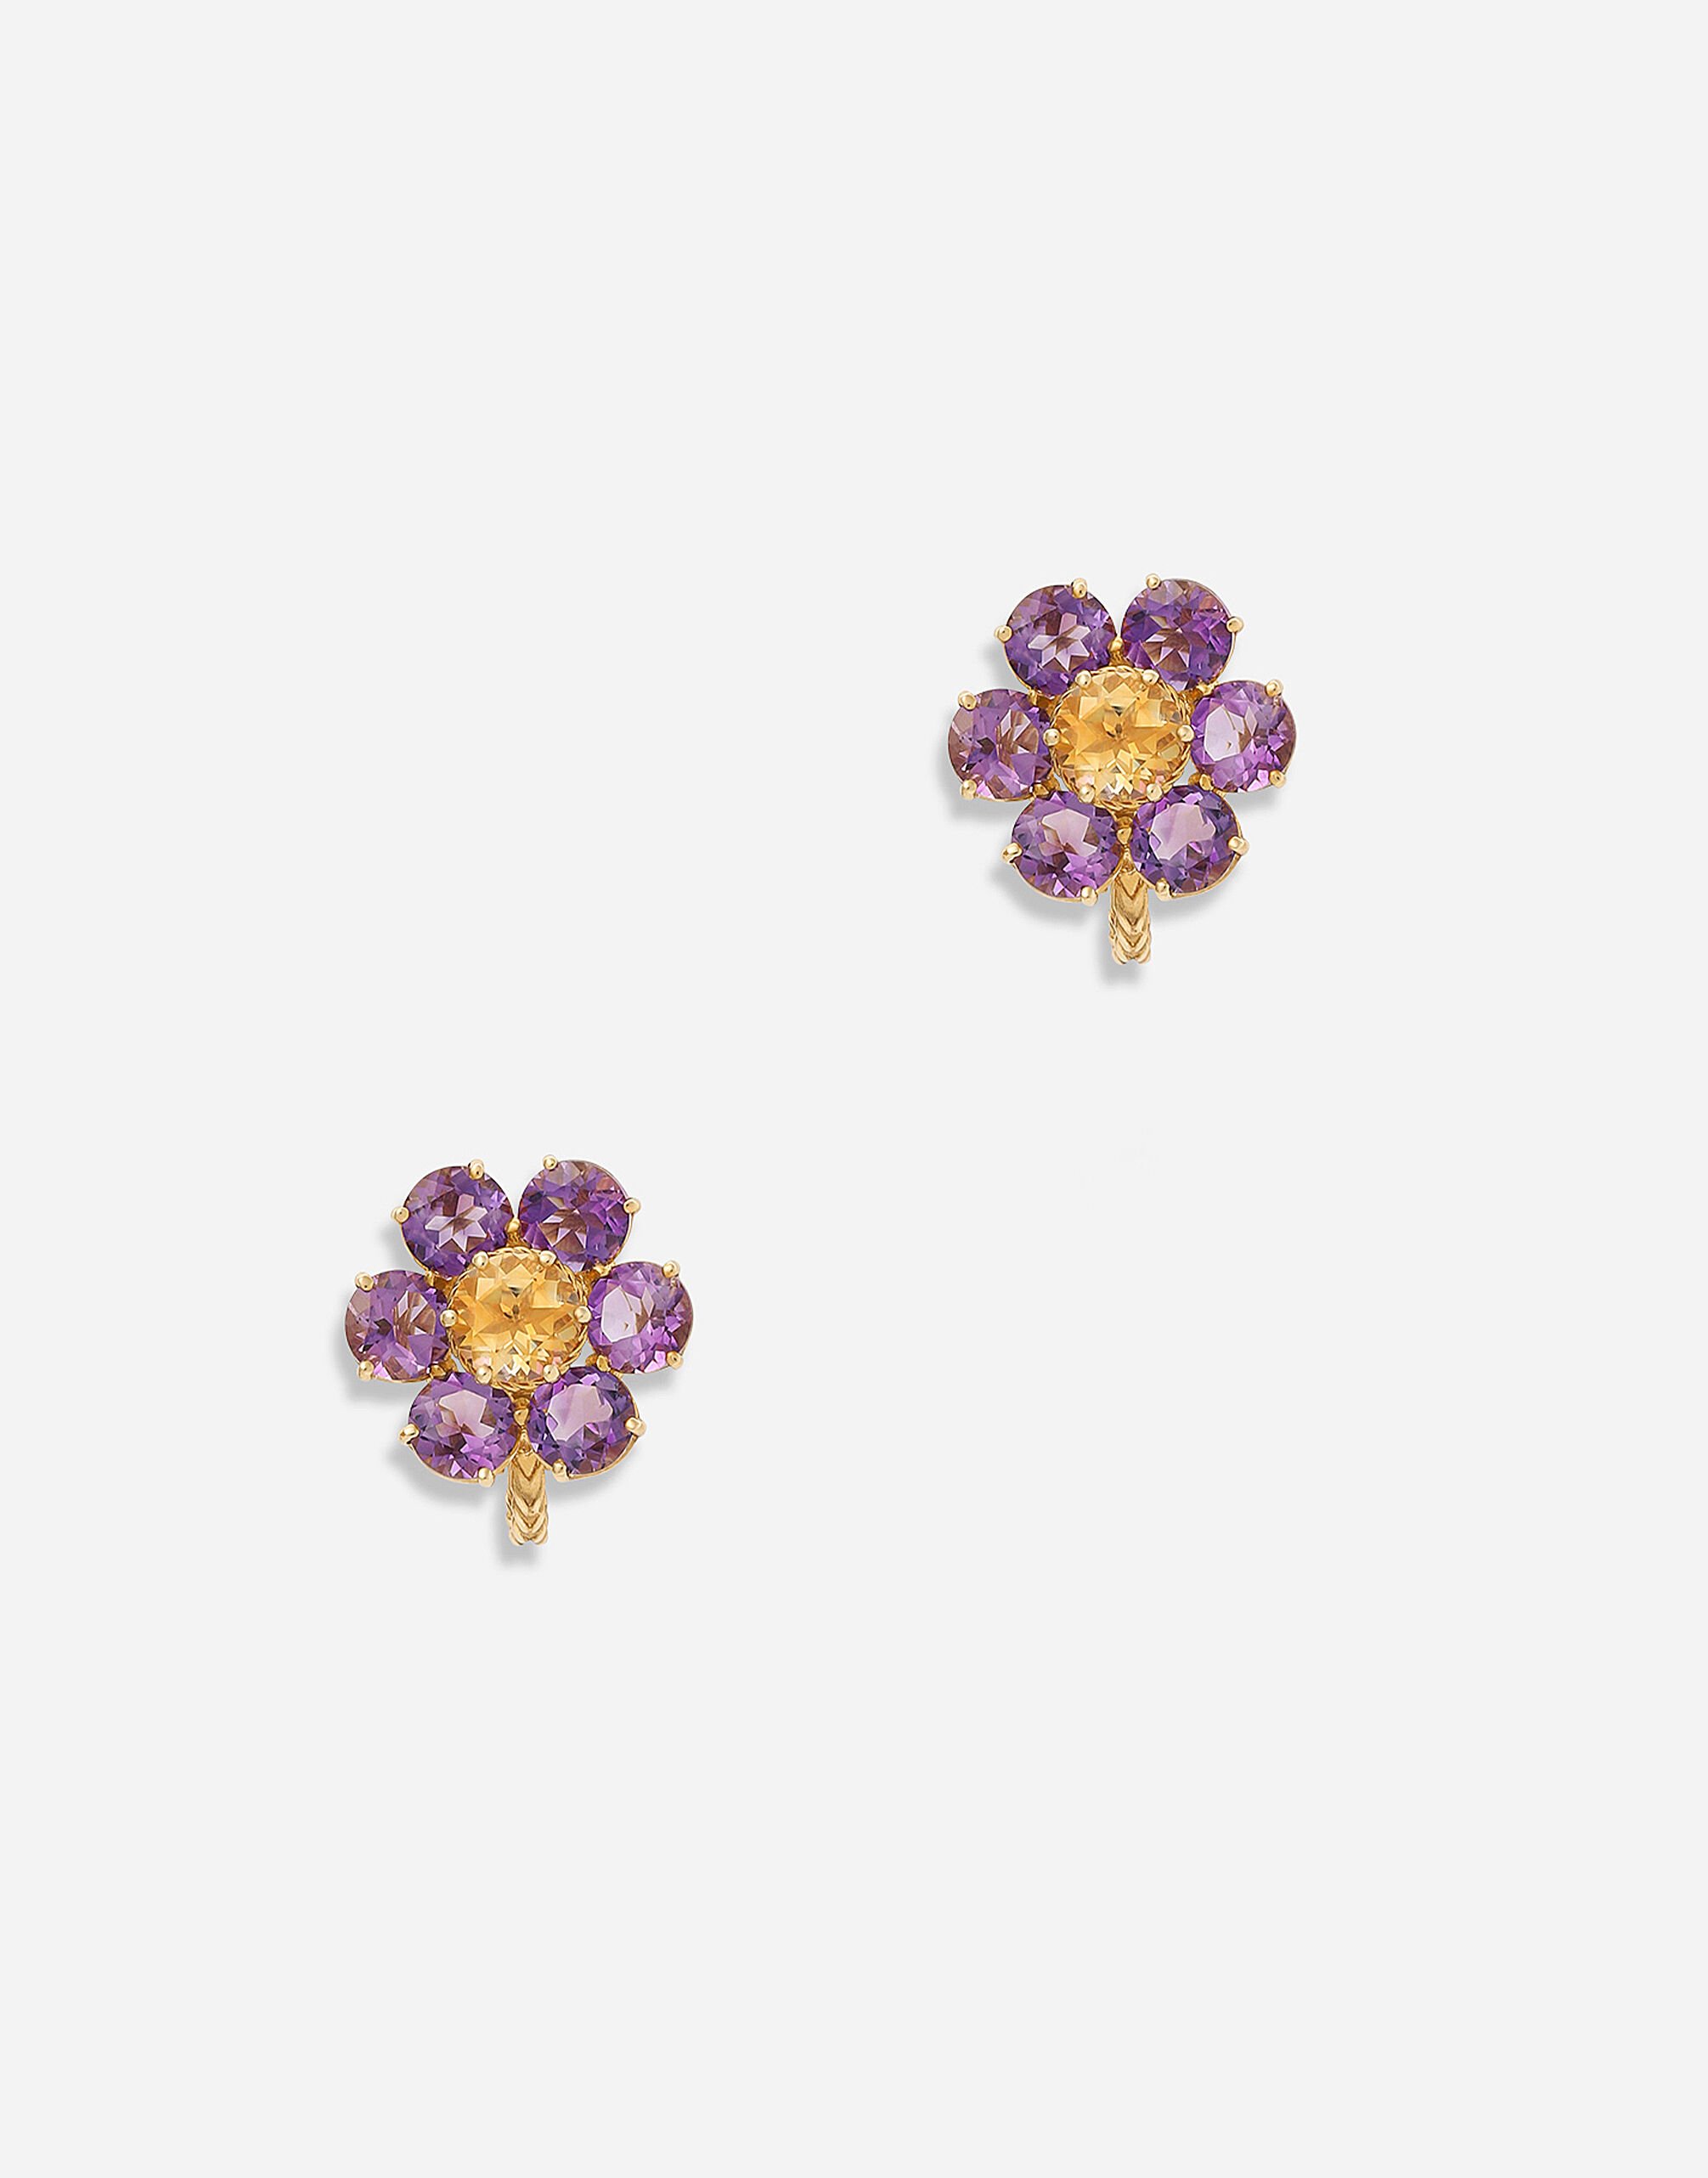 Dolce & Gabbana Spring earrings in yellow 18kt gold with amethyst flower motif Weiss WEQD4GWPAVE